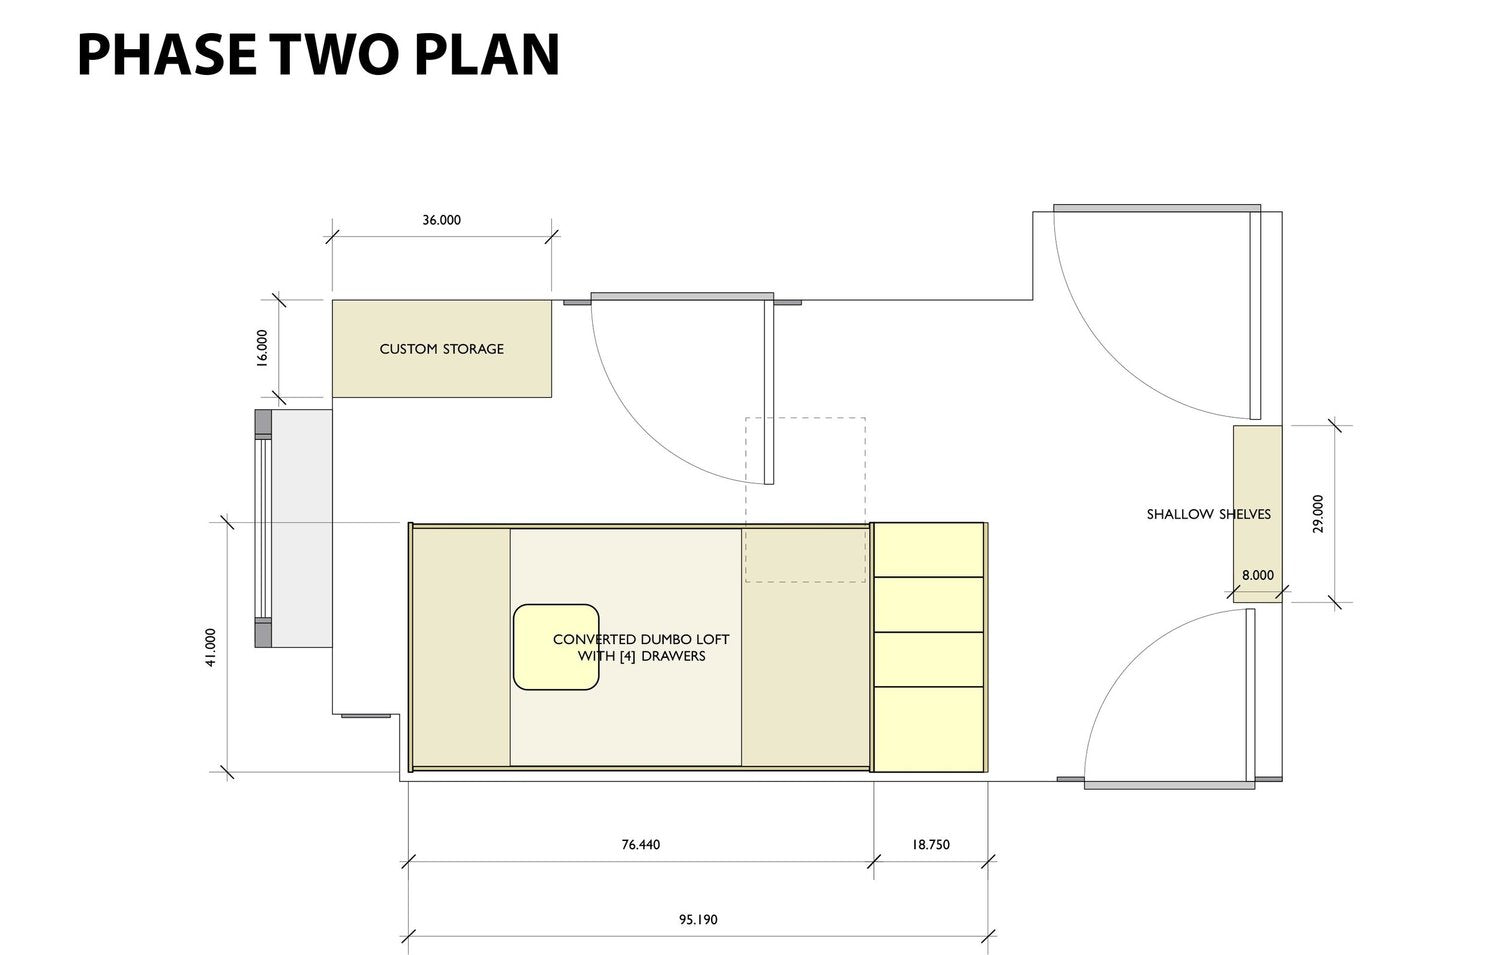 Architectural plan titled ‘PHASE TWO PLAN’ with room layout and detailed dimensions